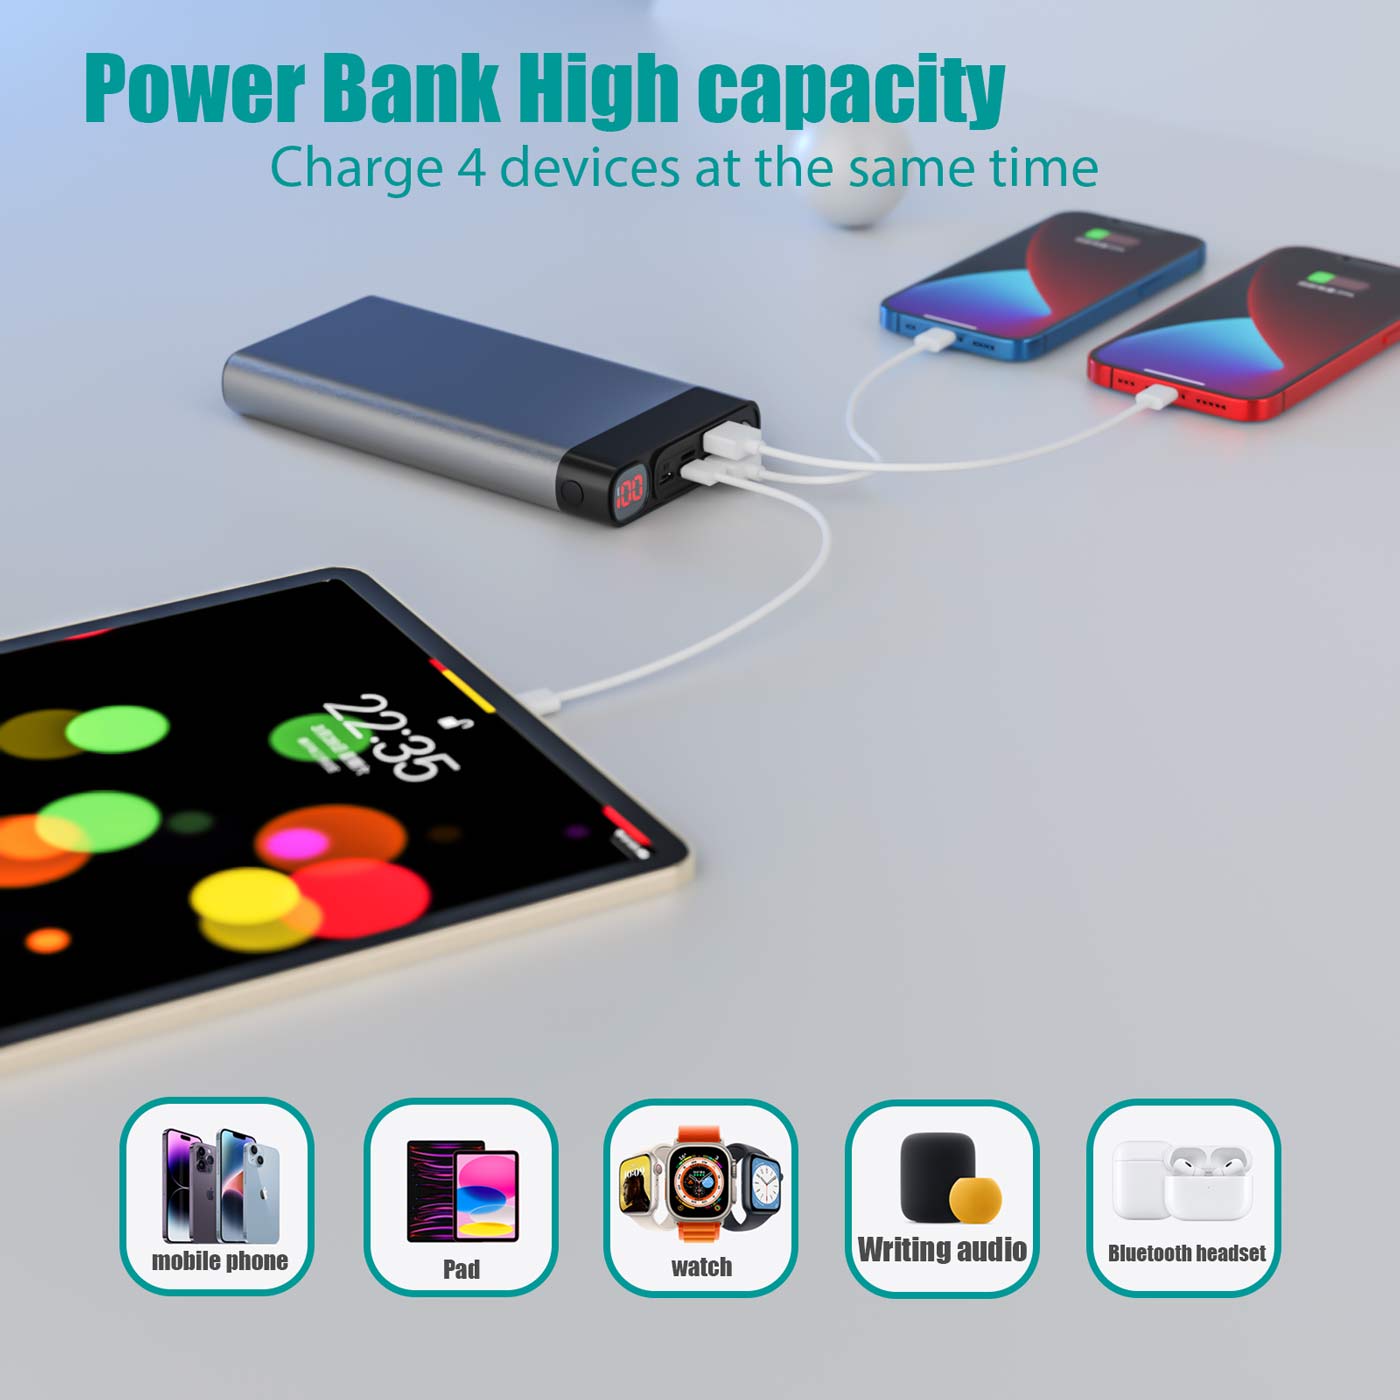 ELEFULL-Portable Power Bank, 26800mAh with QC3.0 22.5W & USB C PD20W Fast Charger in Secure Metal Case, LED Display, Flashlight - Compact & Stylish Chargers for Phones & Tablets.